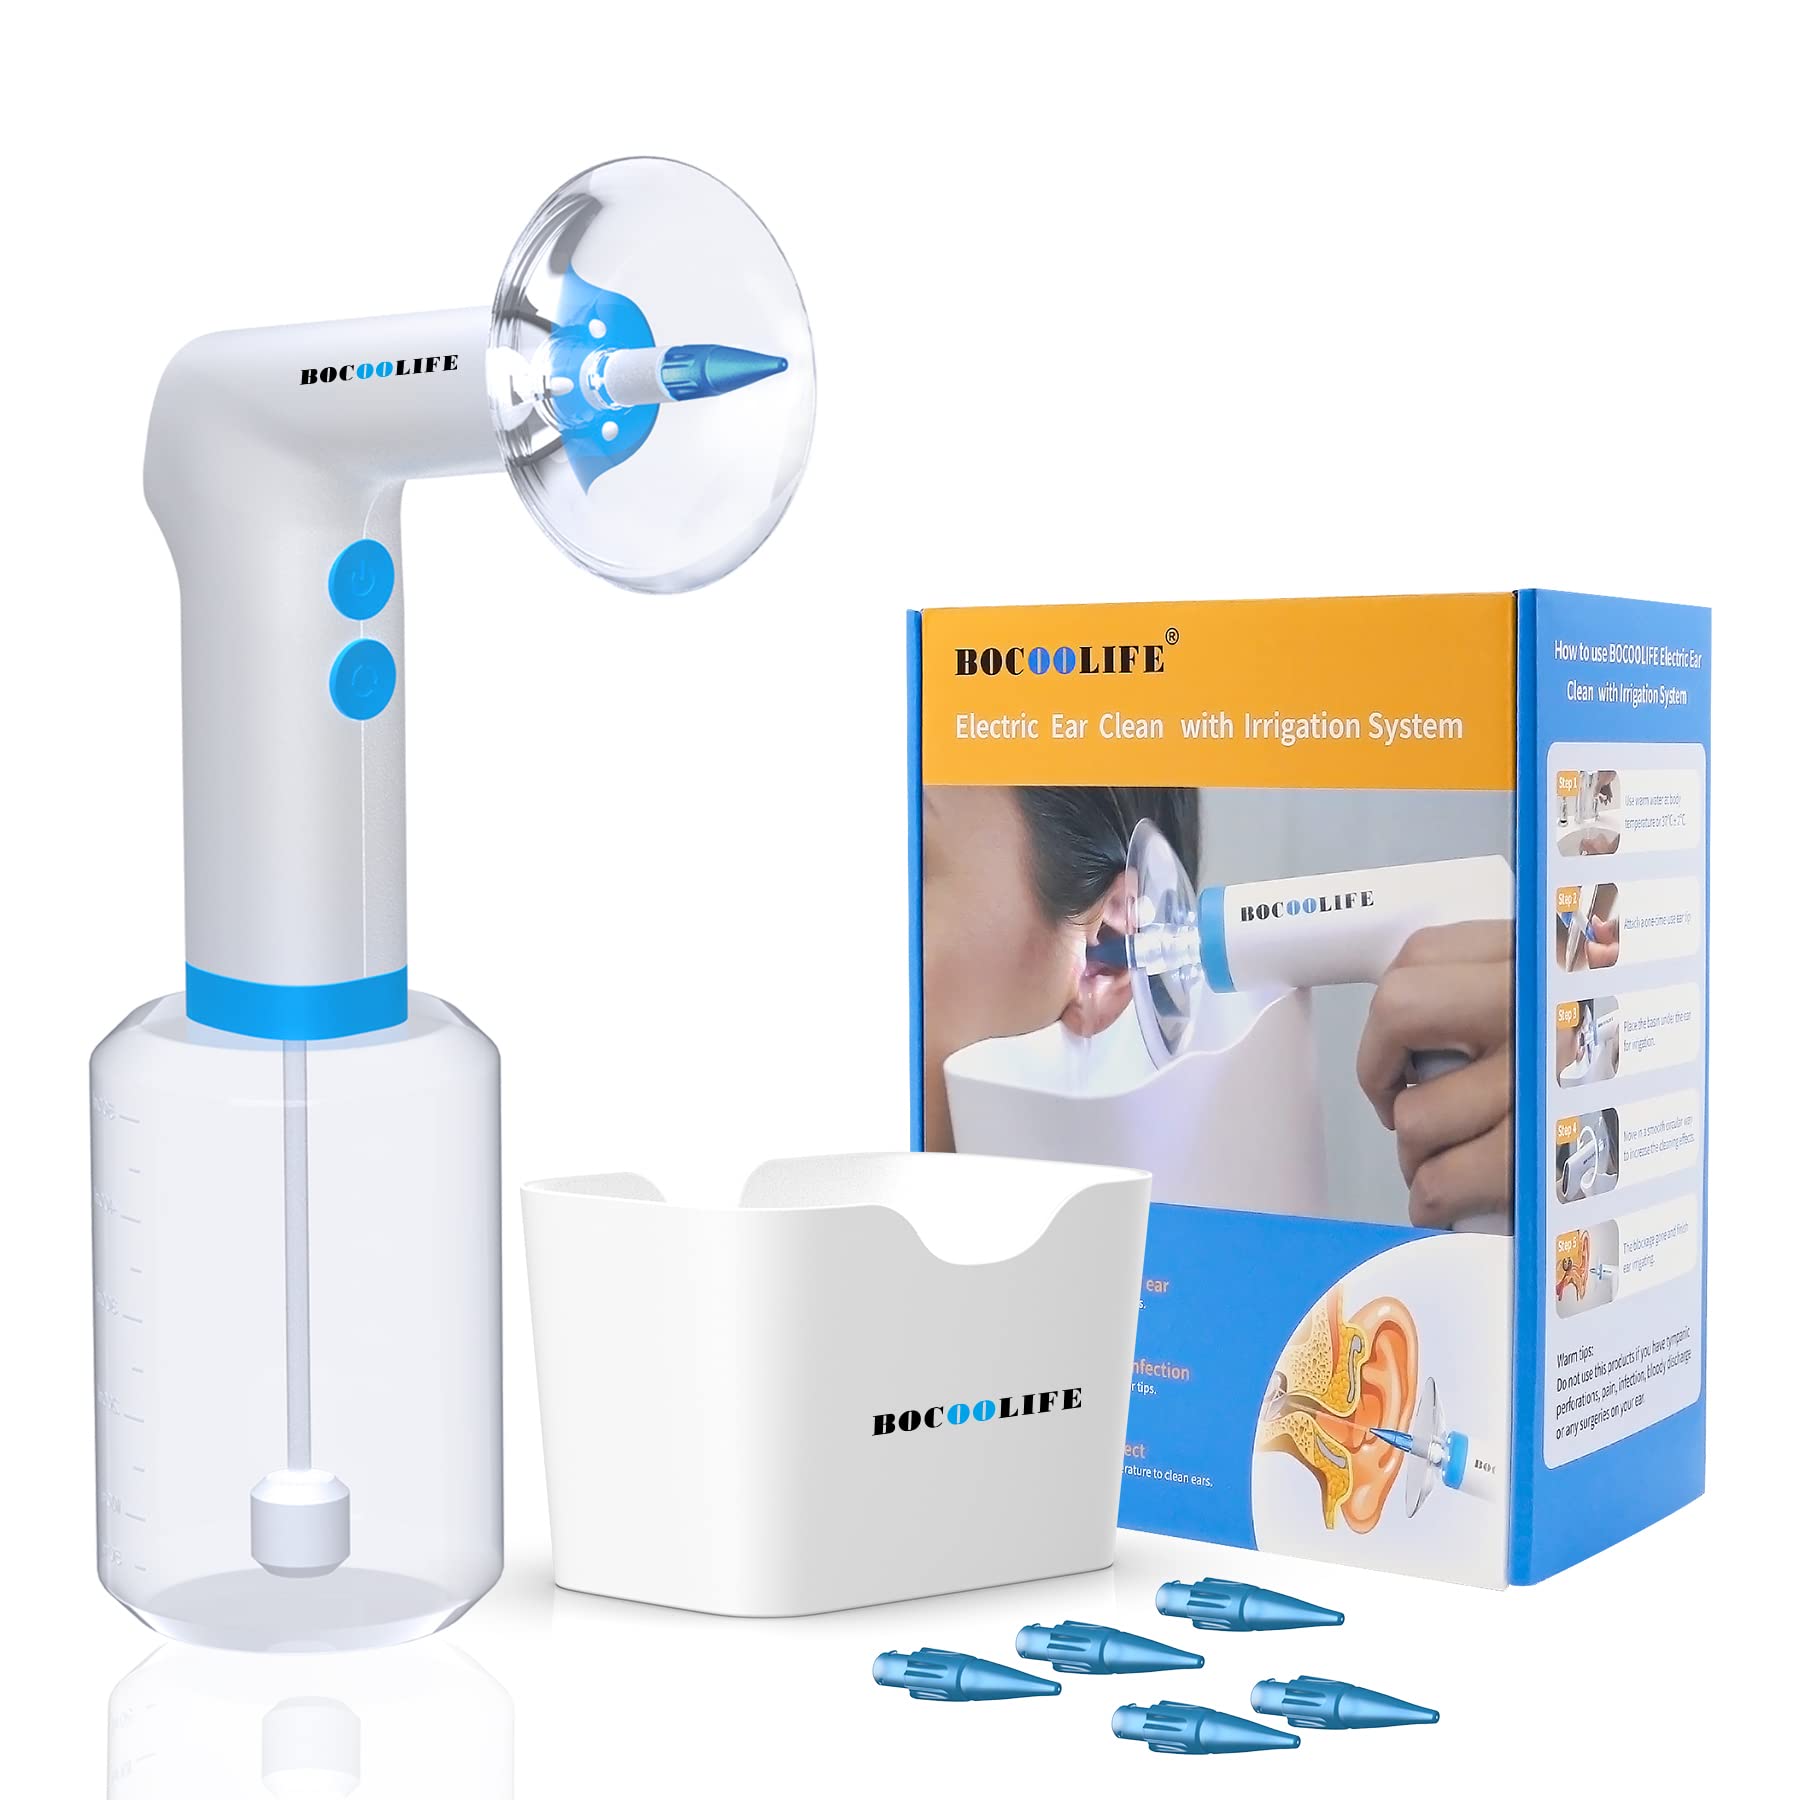 BOCOOLIFE Electric Ear Cleaning Kit - Safe and Efficient Ear Wax Removal  System with Observation Design and 4 Water Levels